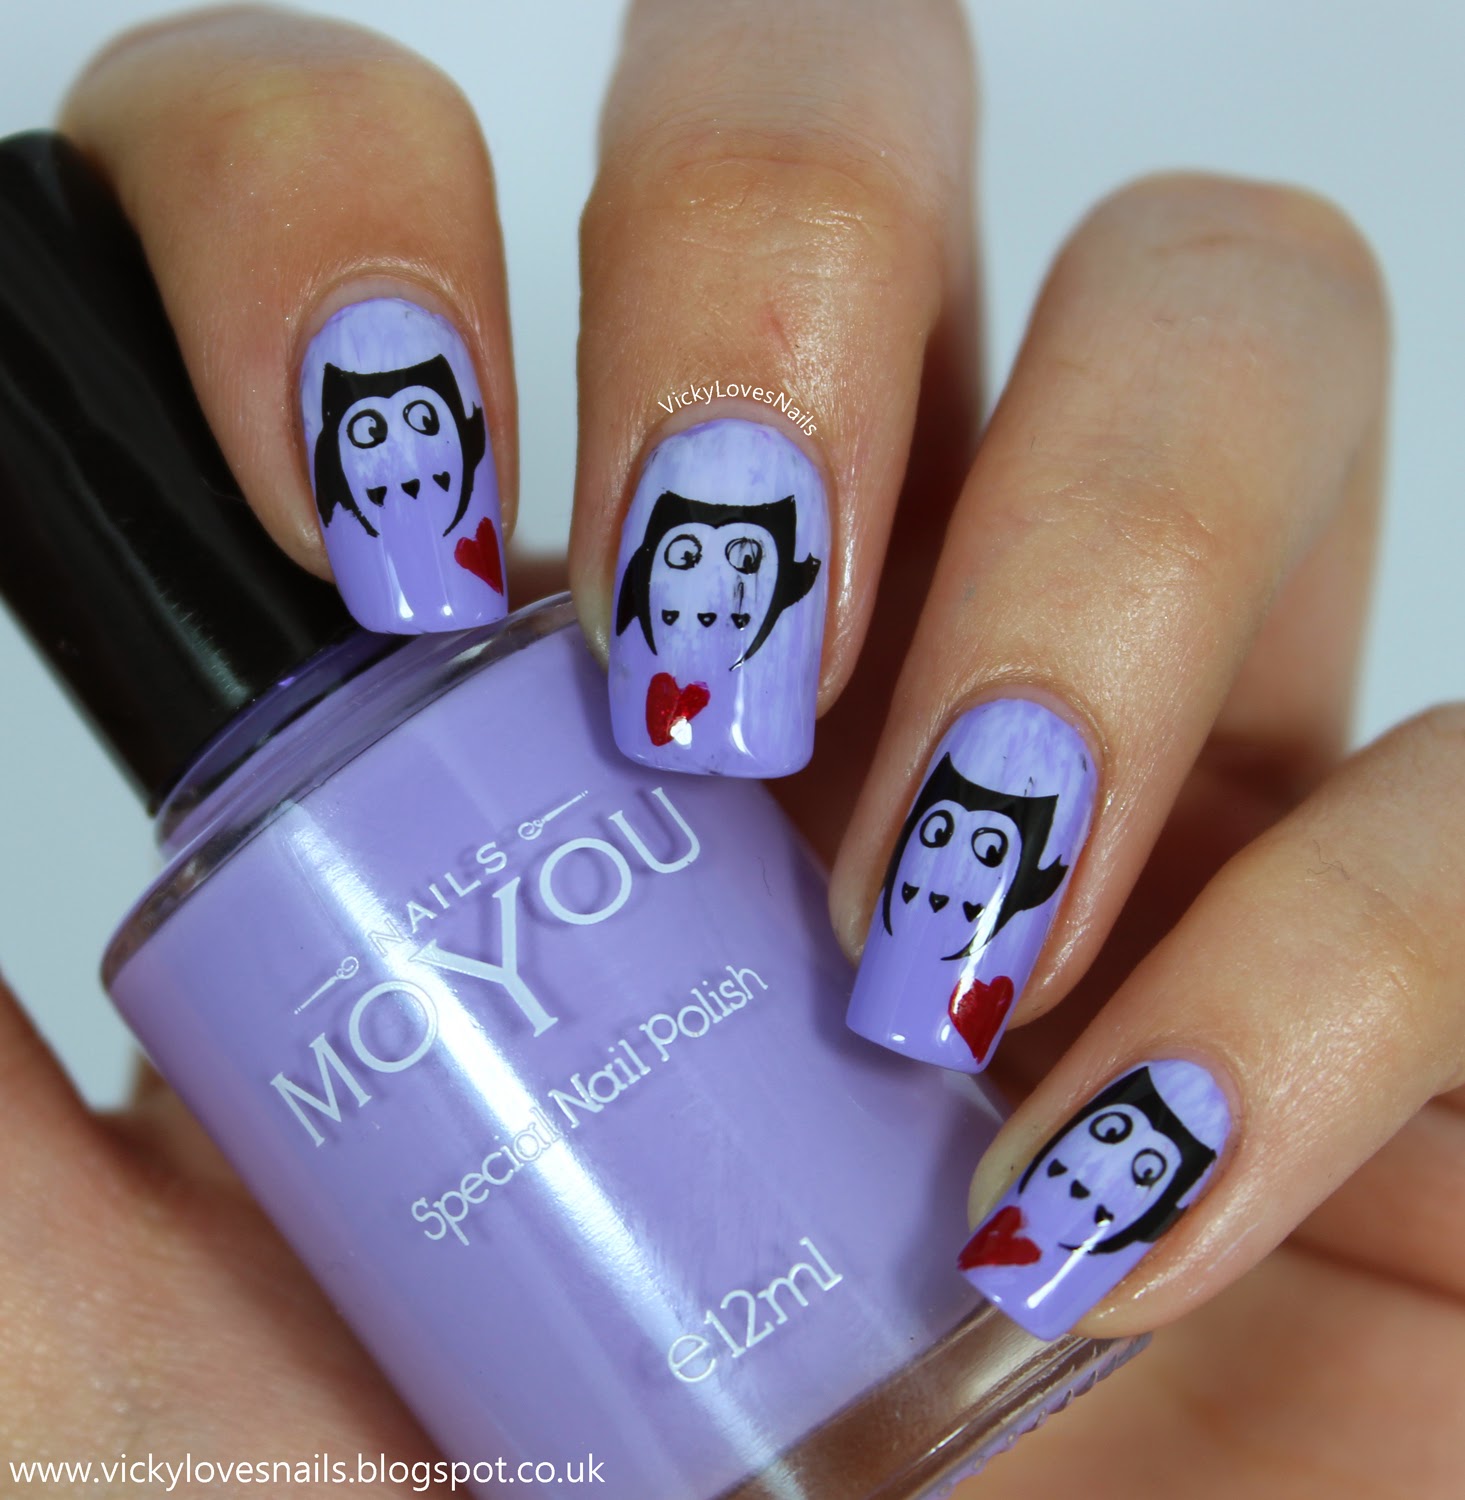 Vicky Loves Nails!: MoYou Nails Review